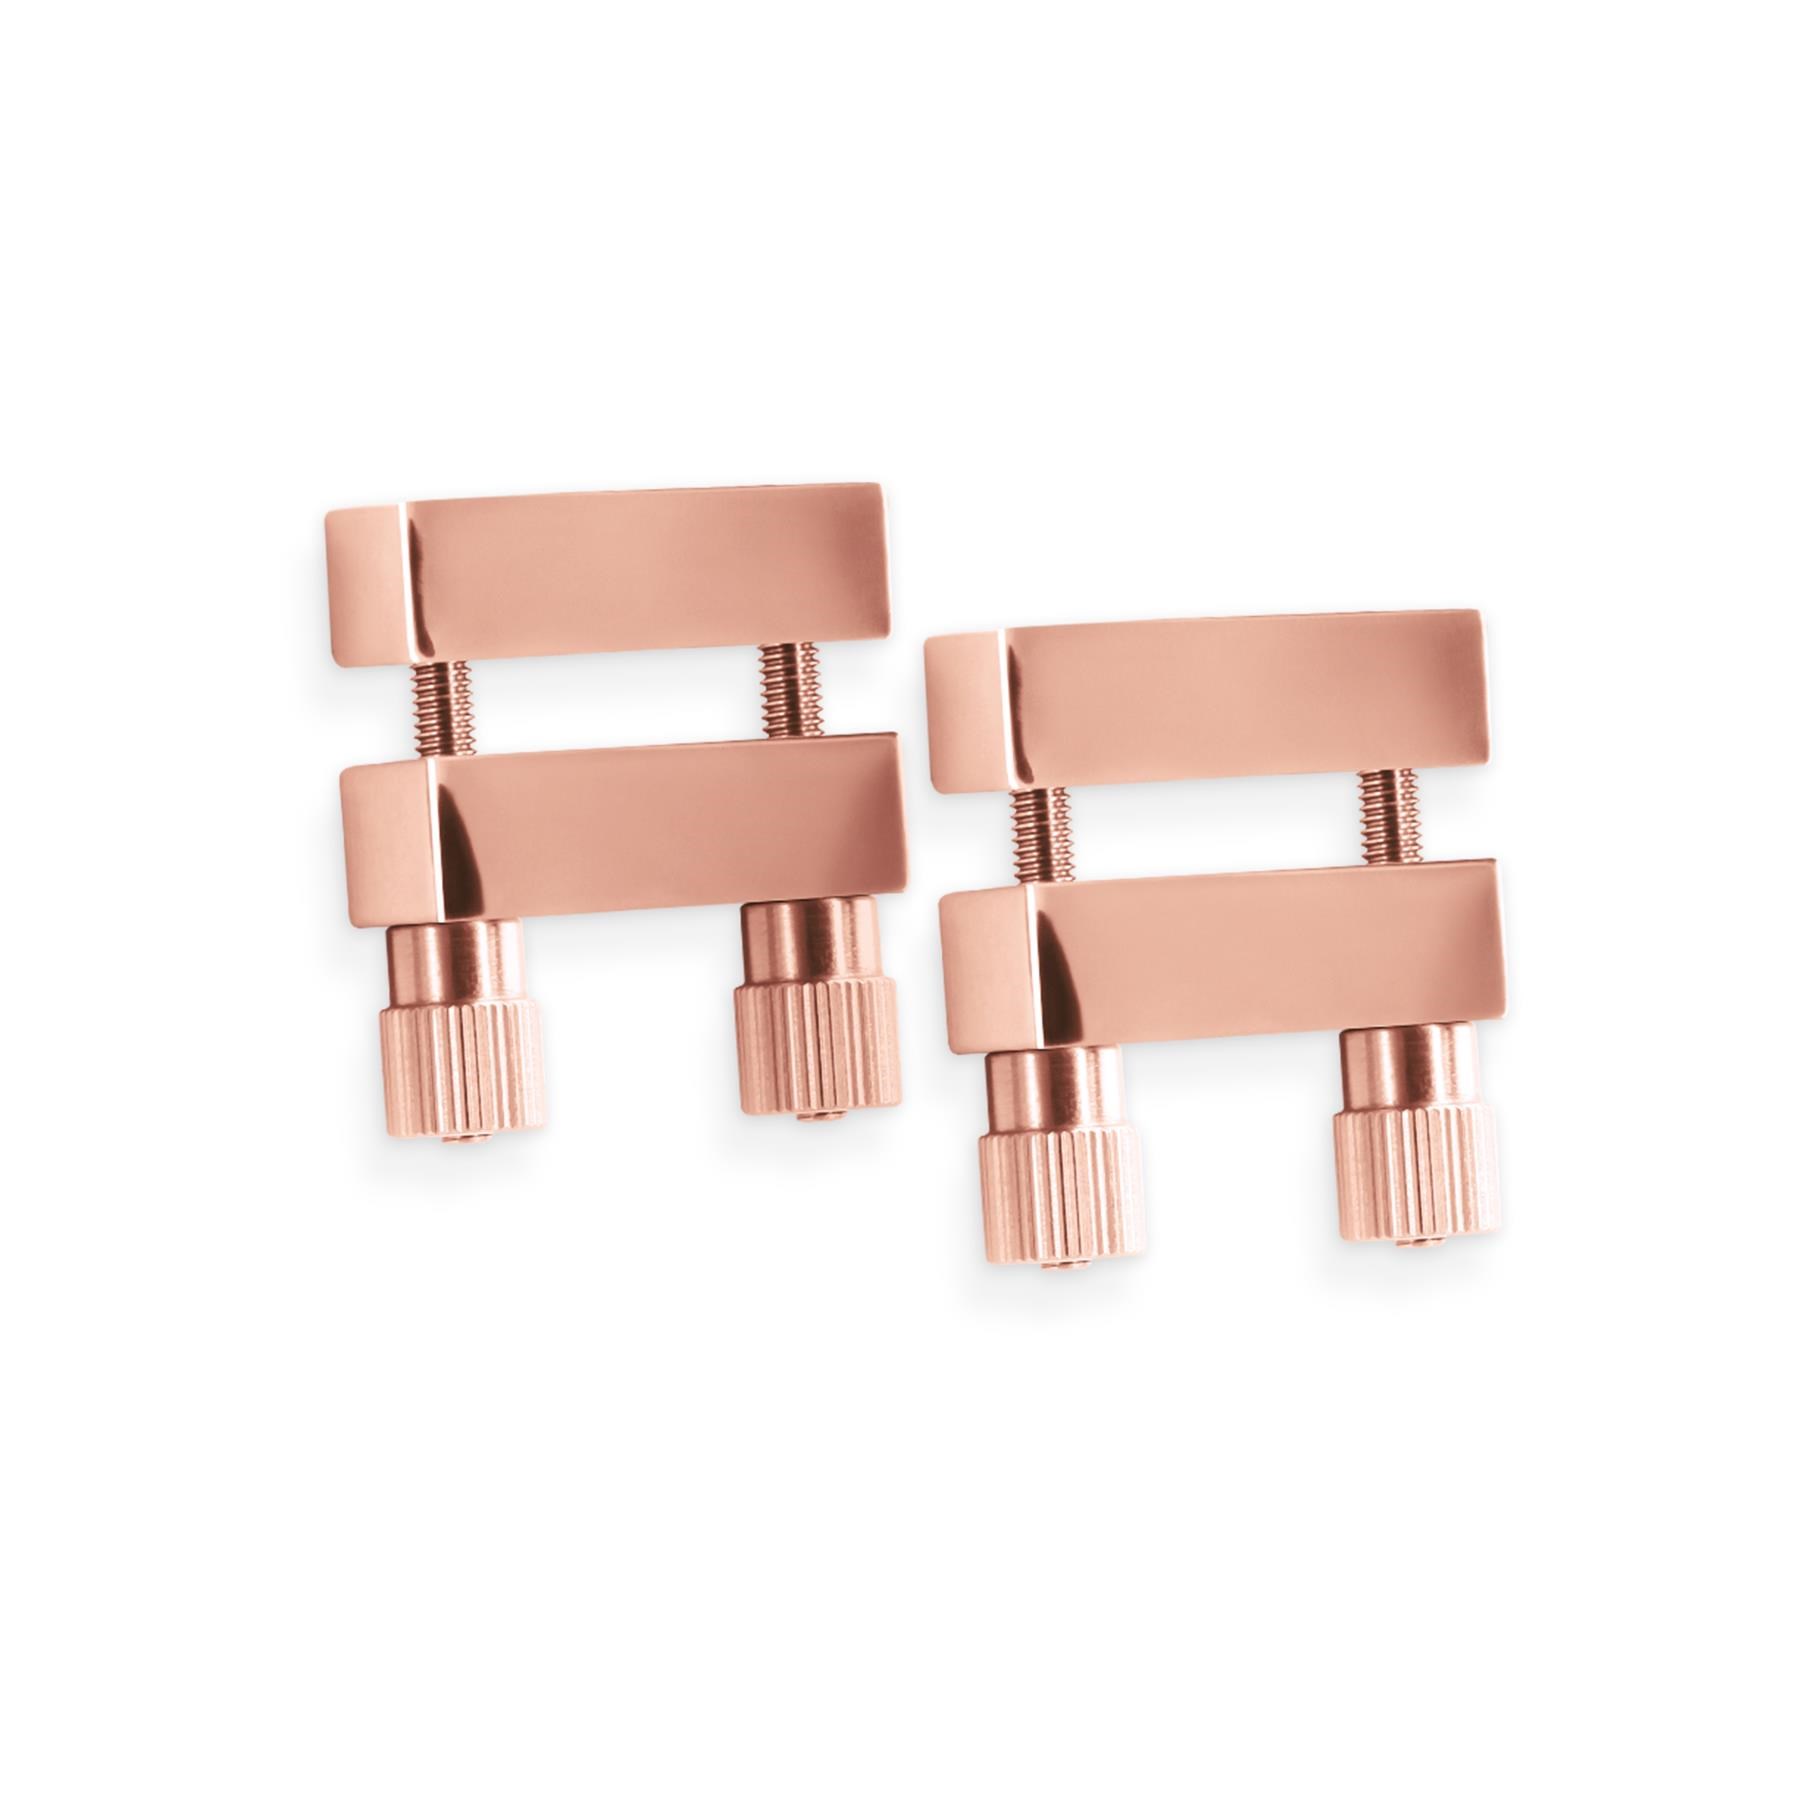 Bound Rose Gold Square Nipple Clamps With Screws - Product Shot